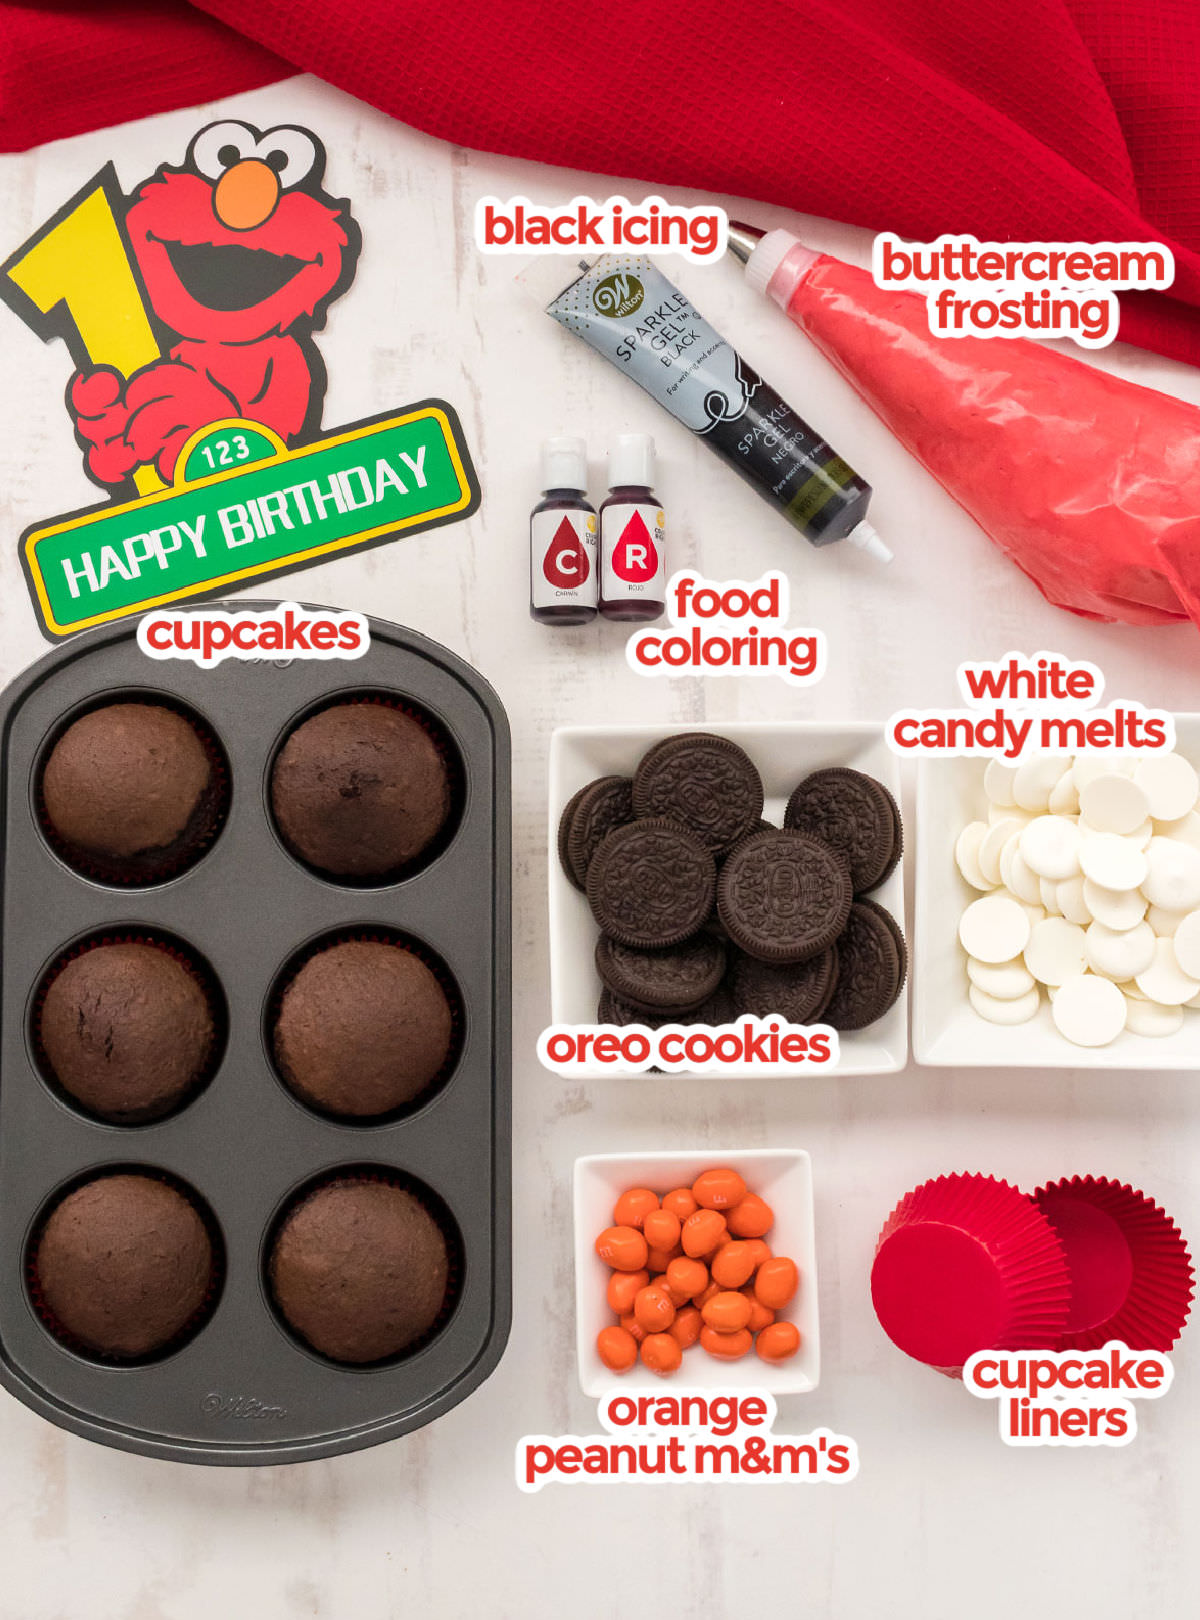 All the ingredients you will need to make Elmo Cupcakes including cupcakes, buttercream frosting, black icing, food coloring, candy melts, oreo cookies, orange peanut m&m's and red cupcake liners.